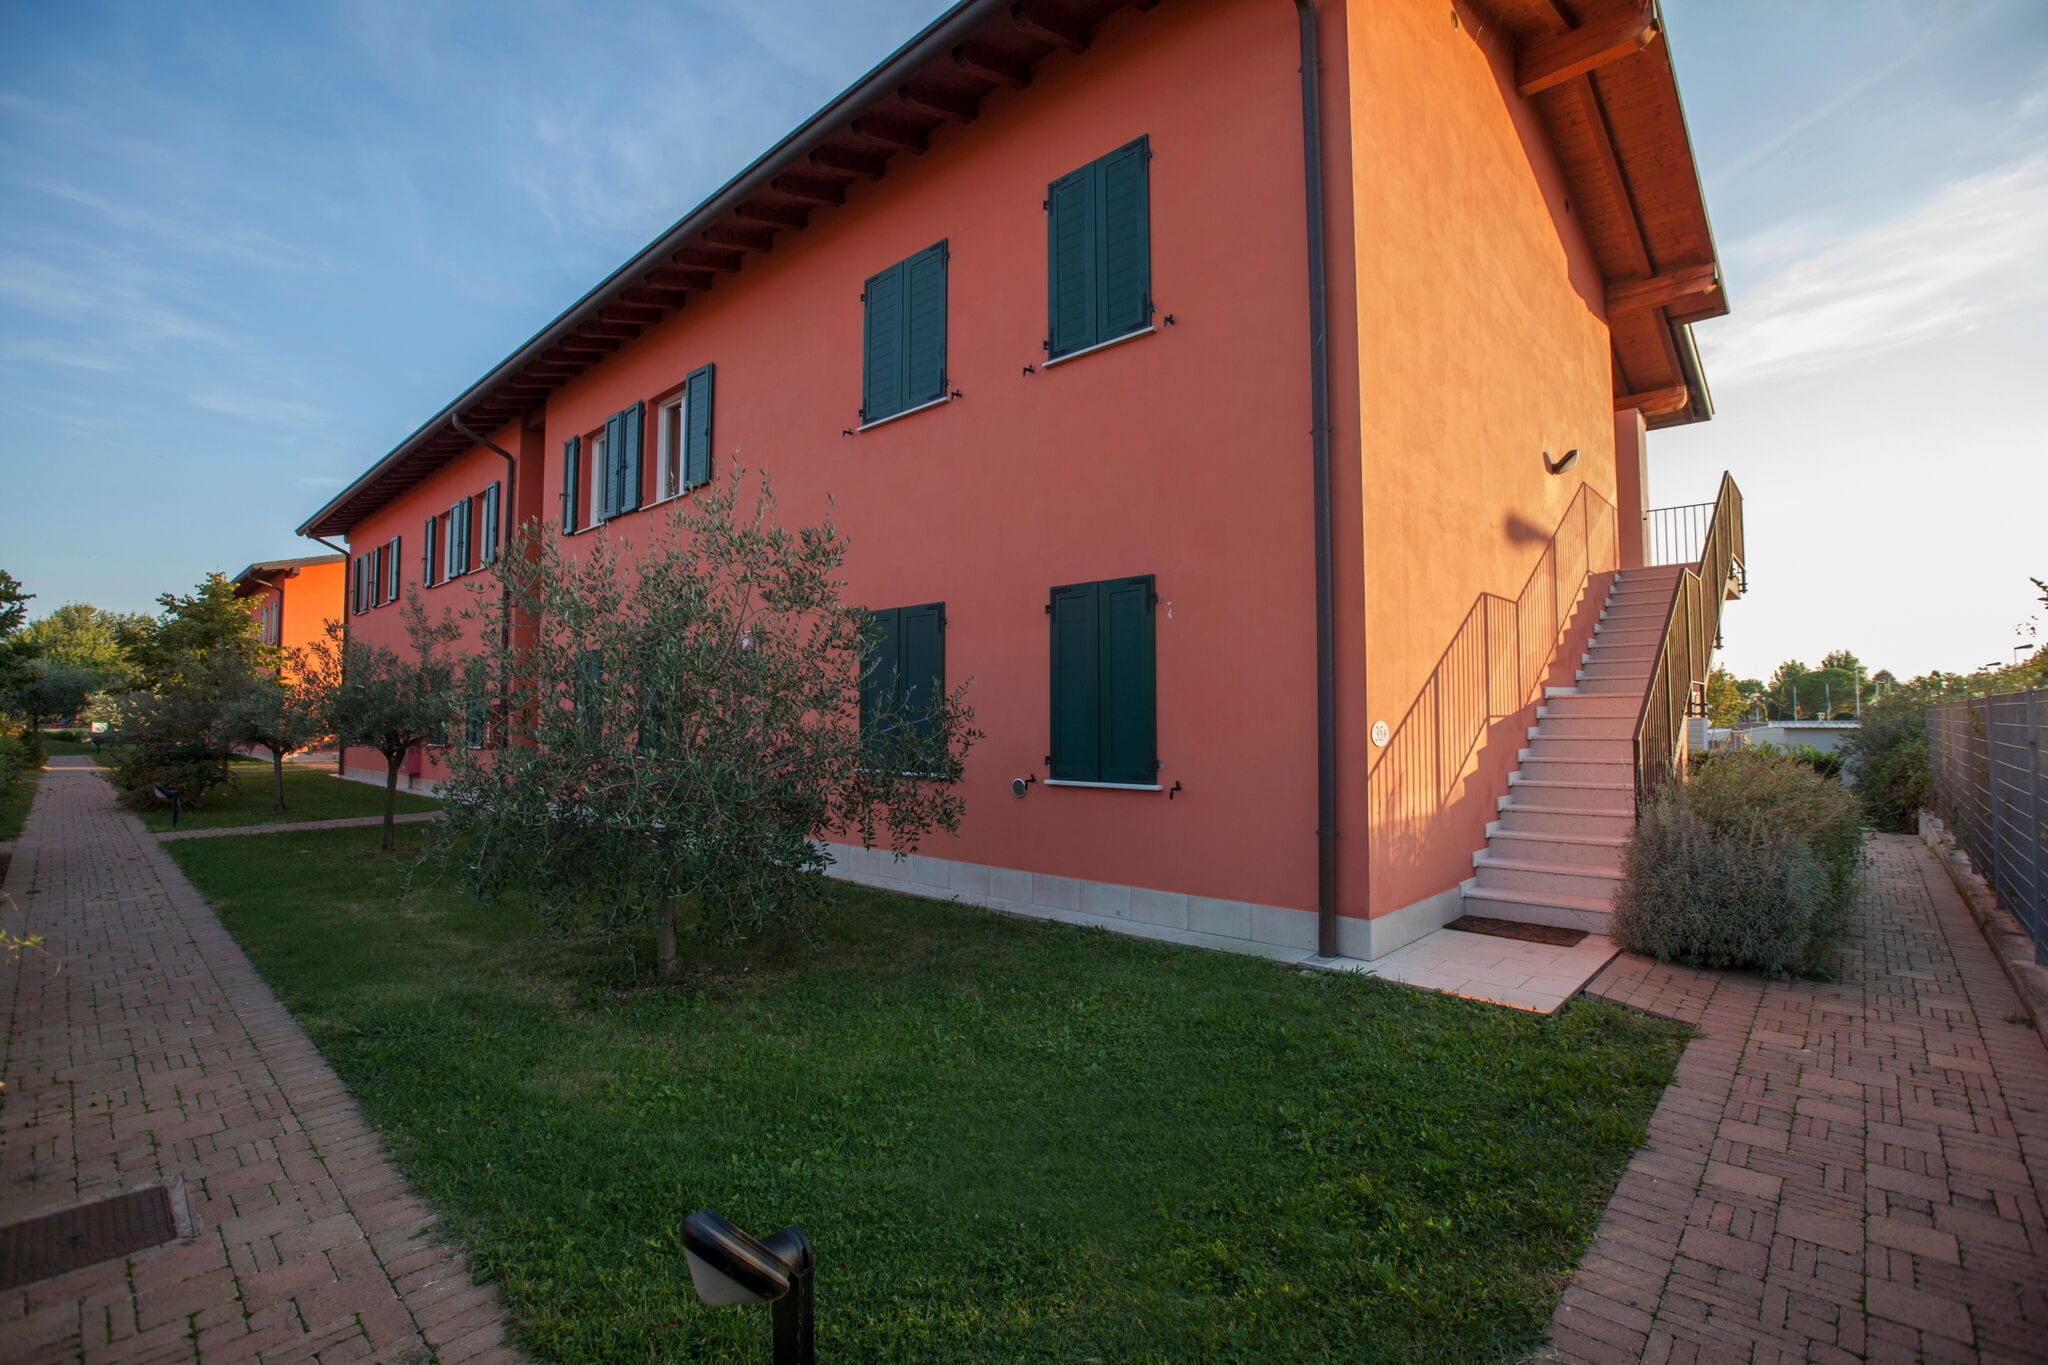 Semi-detached bungalow with AC just 3, 5 km. from Sirmione